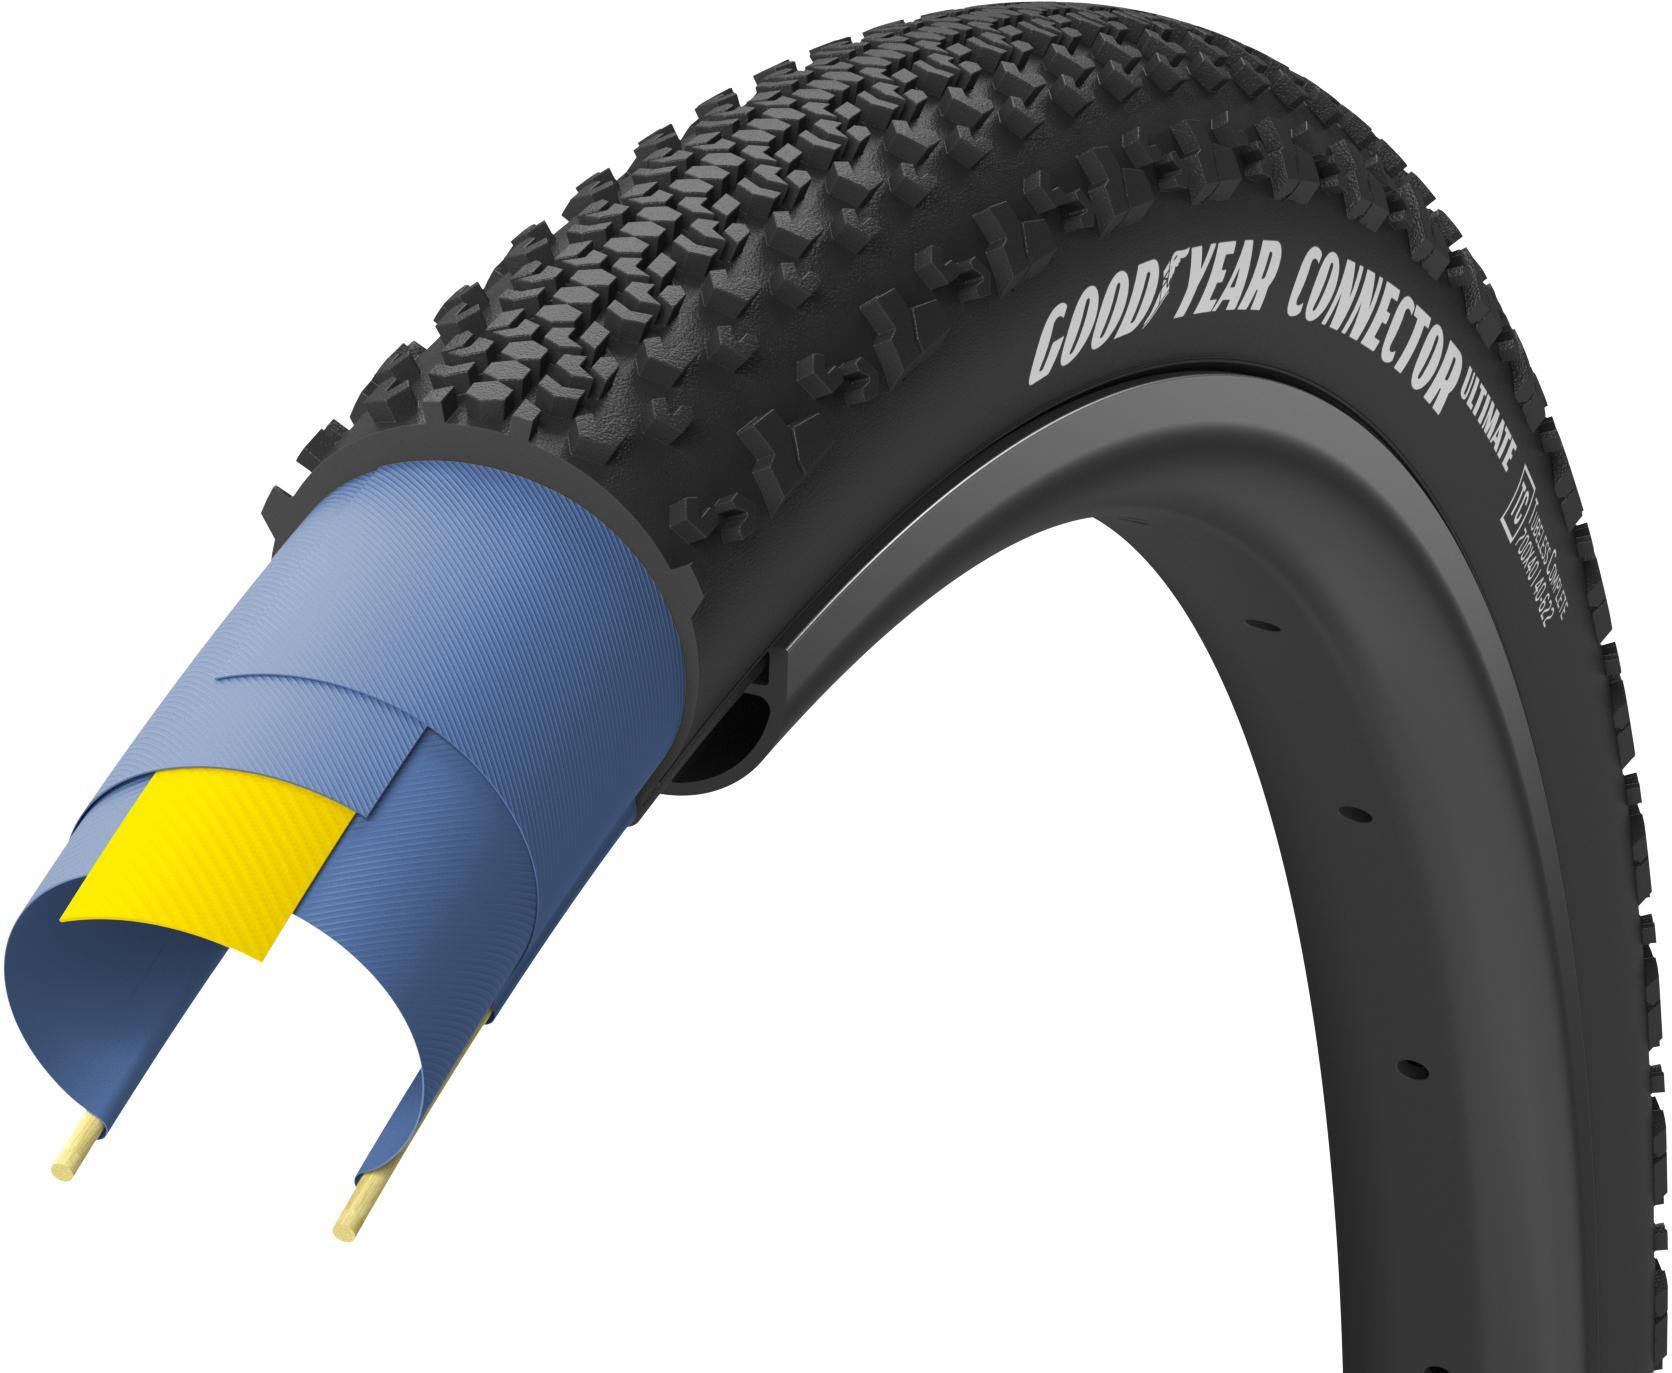 Goodyear Connector Ultimate Tubeless 650X50 Bike Tyre